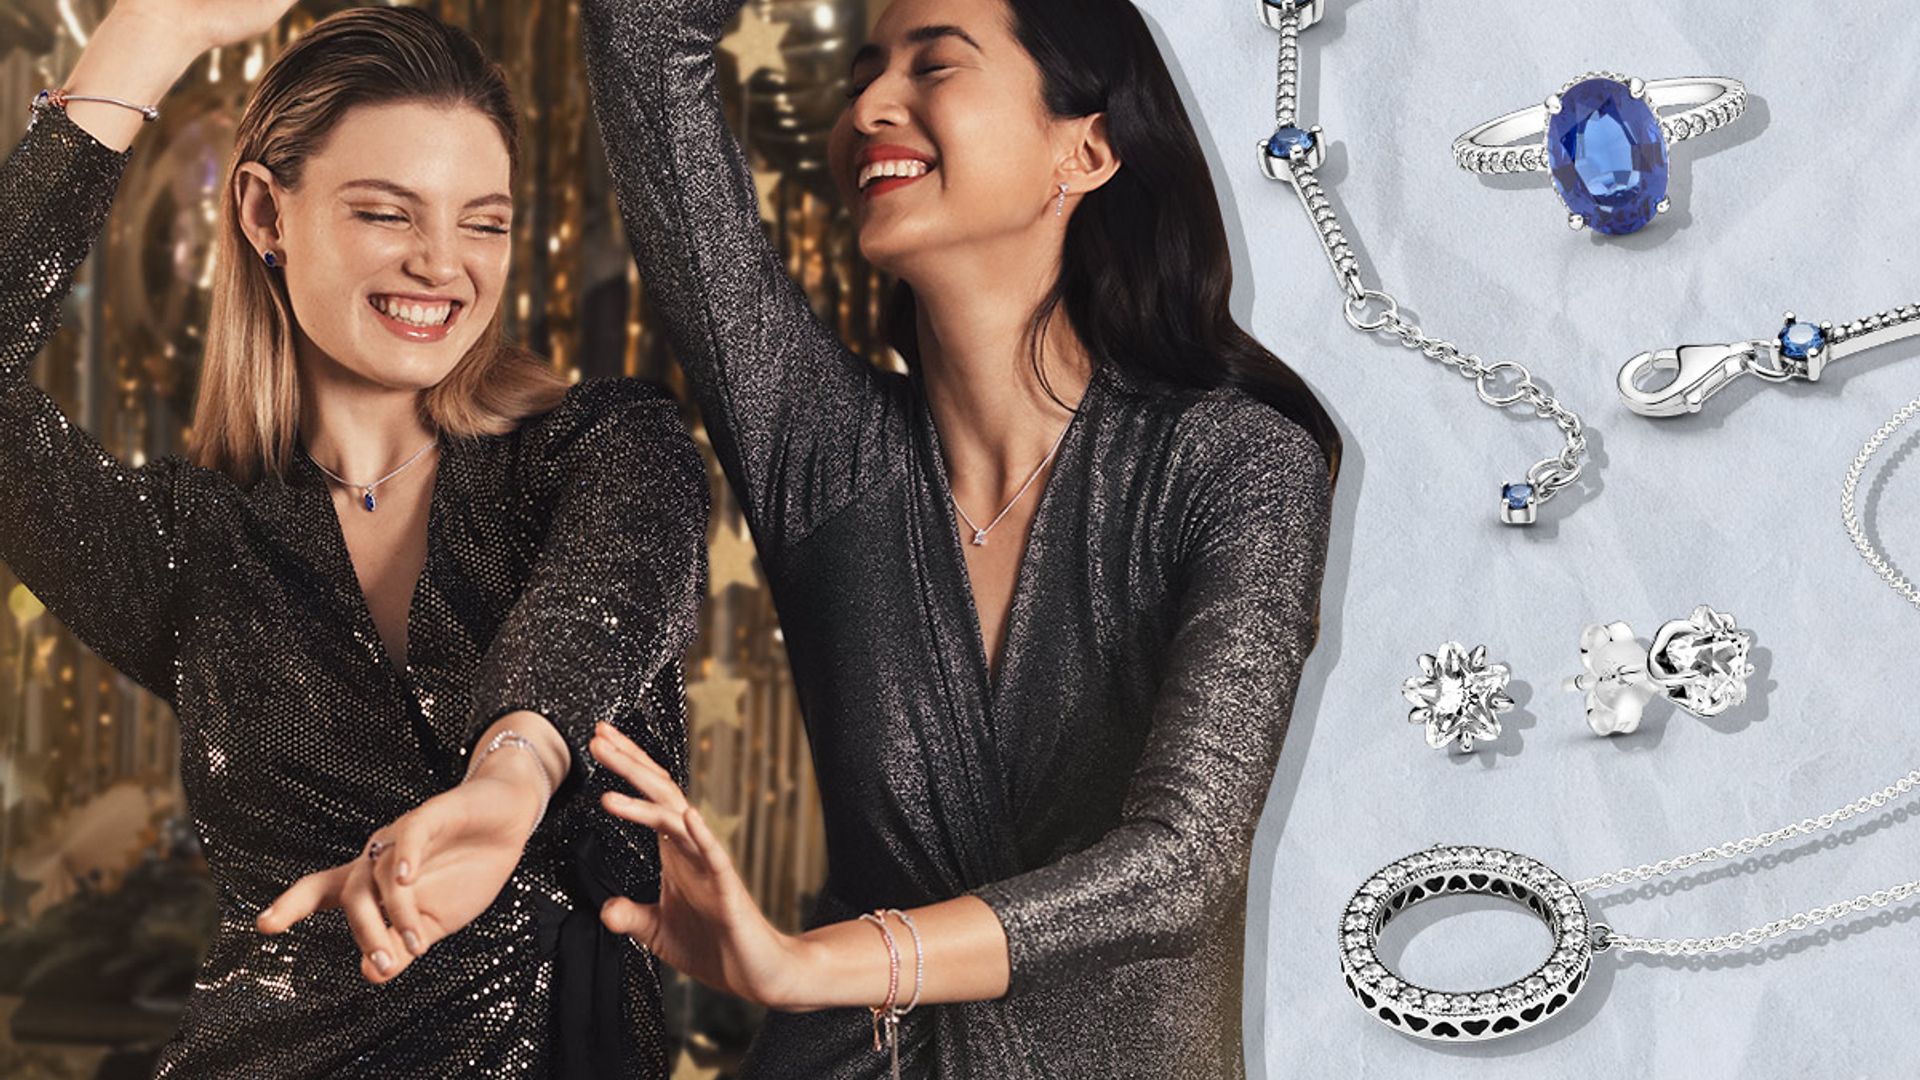 Bring On The Sparkle. Pandora Jewelry Makes A Thoughtful, Timeless Gift -  The Mom Edit